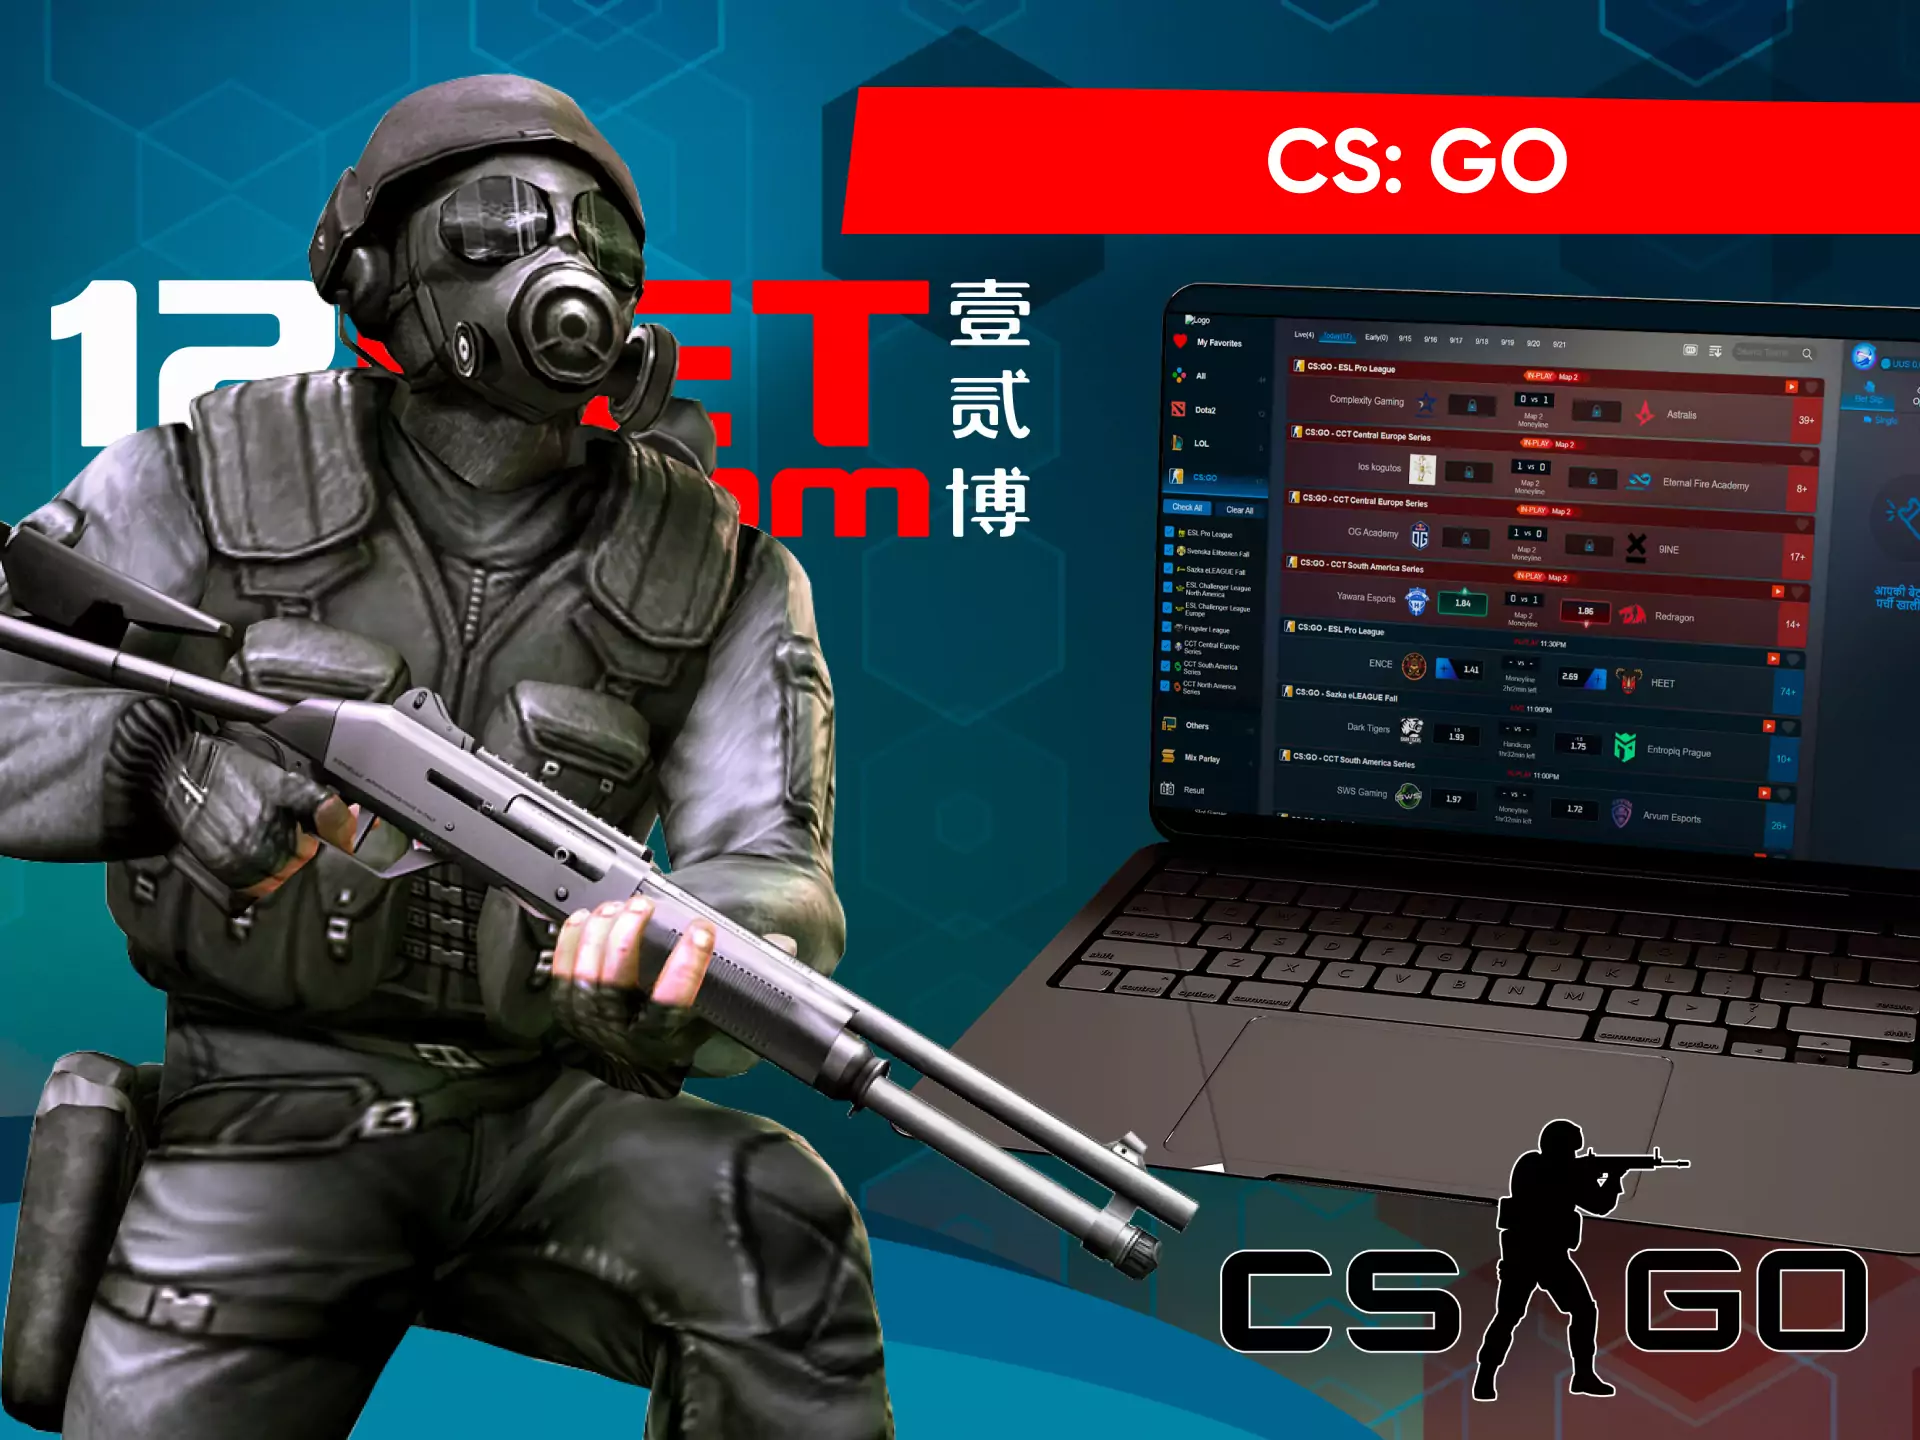 In the esports section of 12bet, you can place bets on CS:GO events.